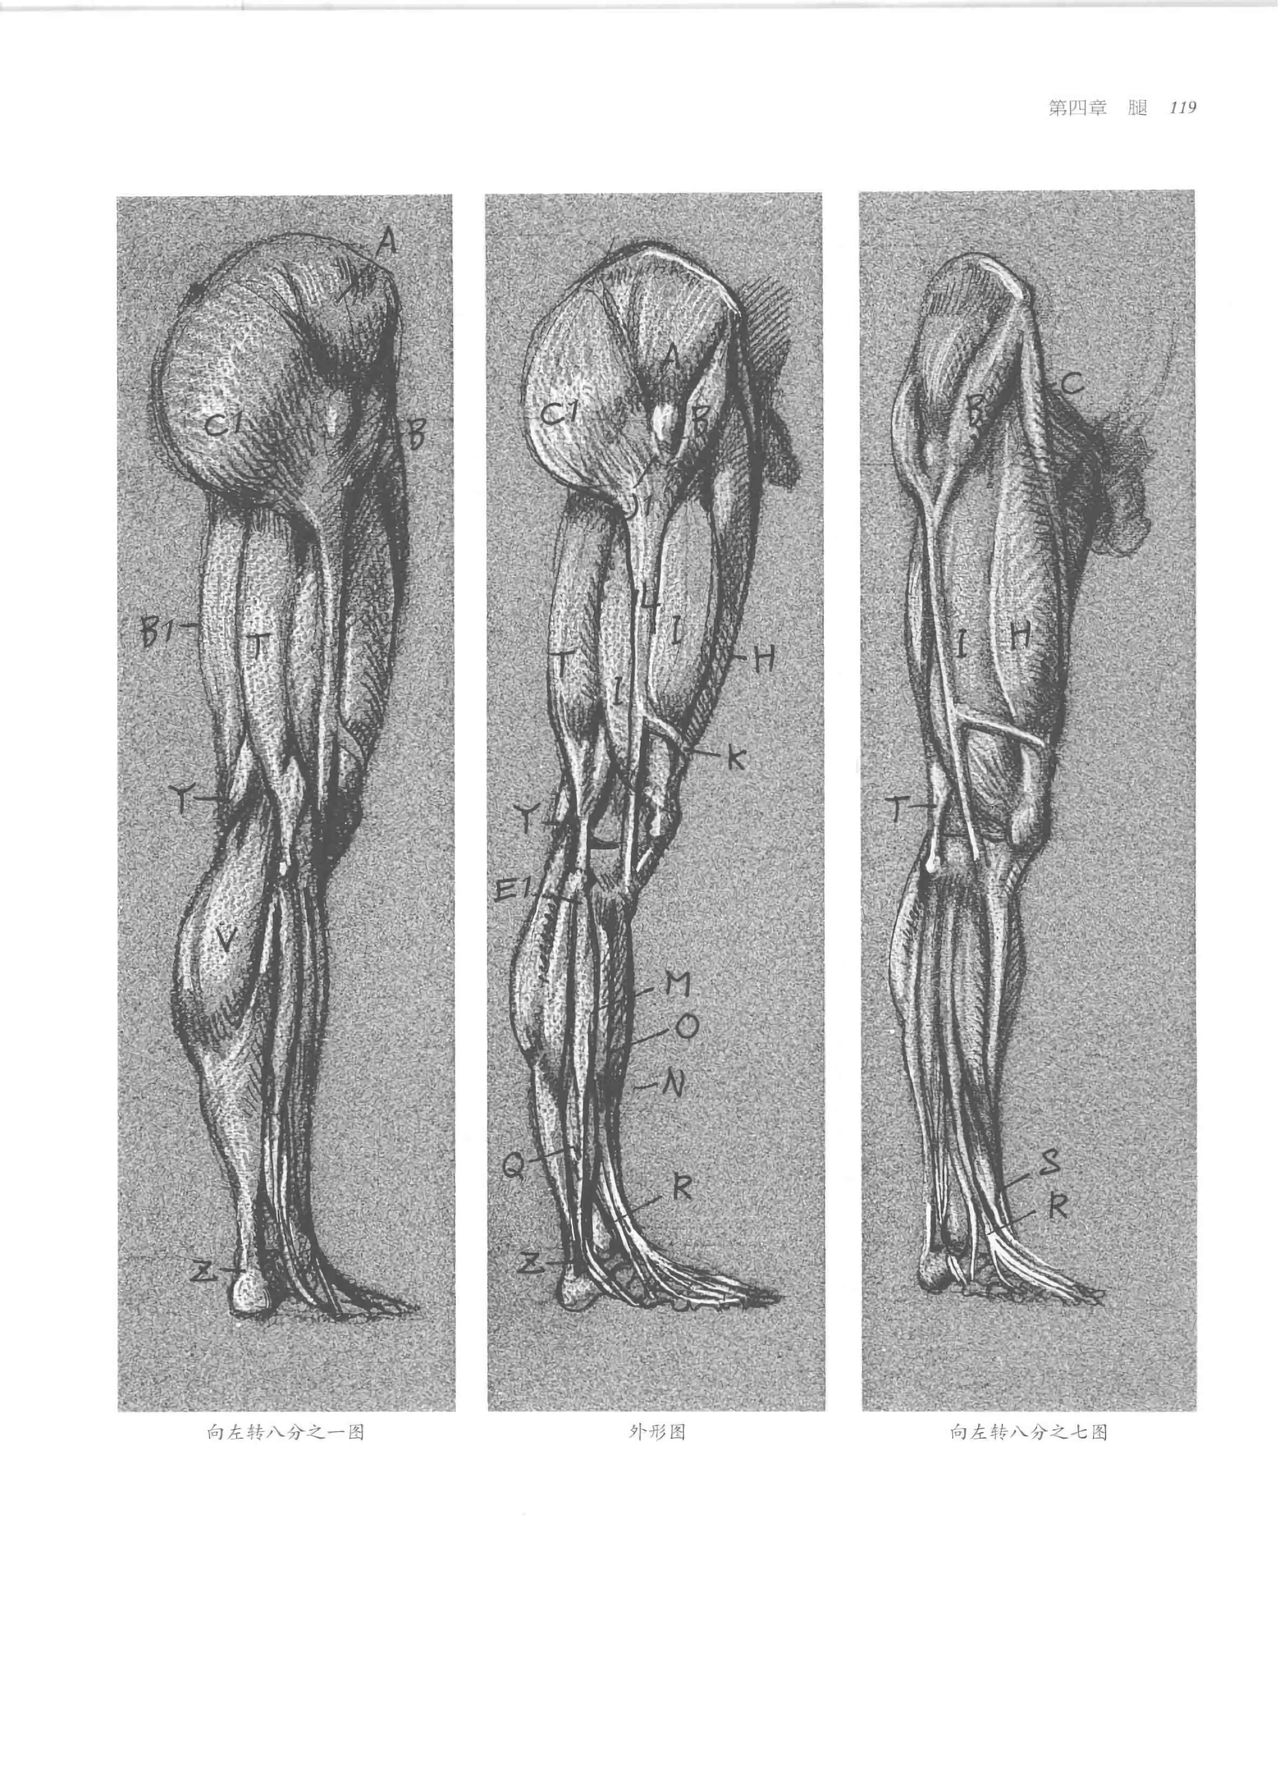 Anatomy-A Complete Guide for Artists - Joseph Sheppard [Chinese] 119